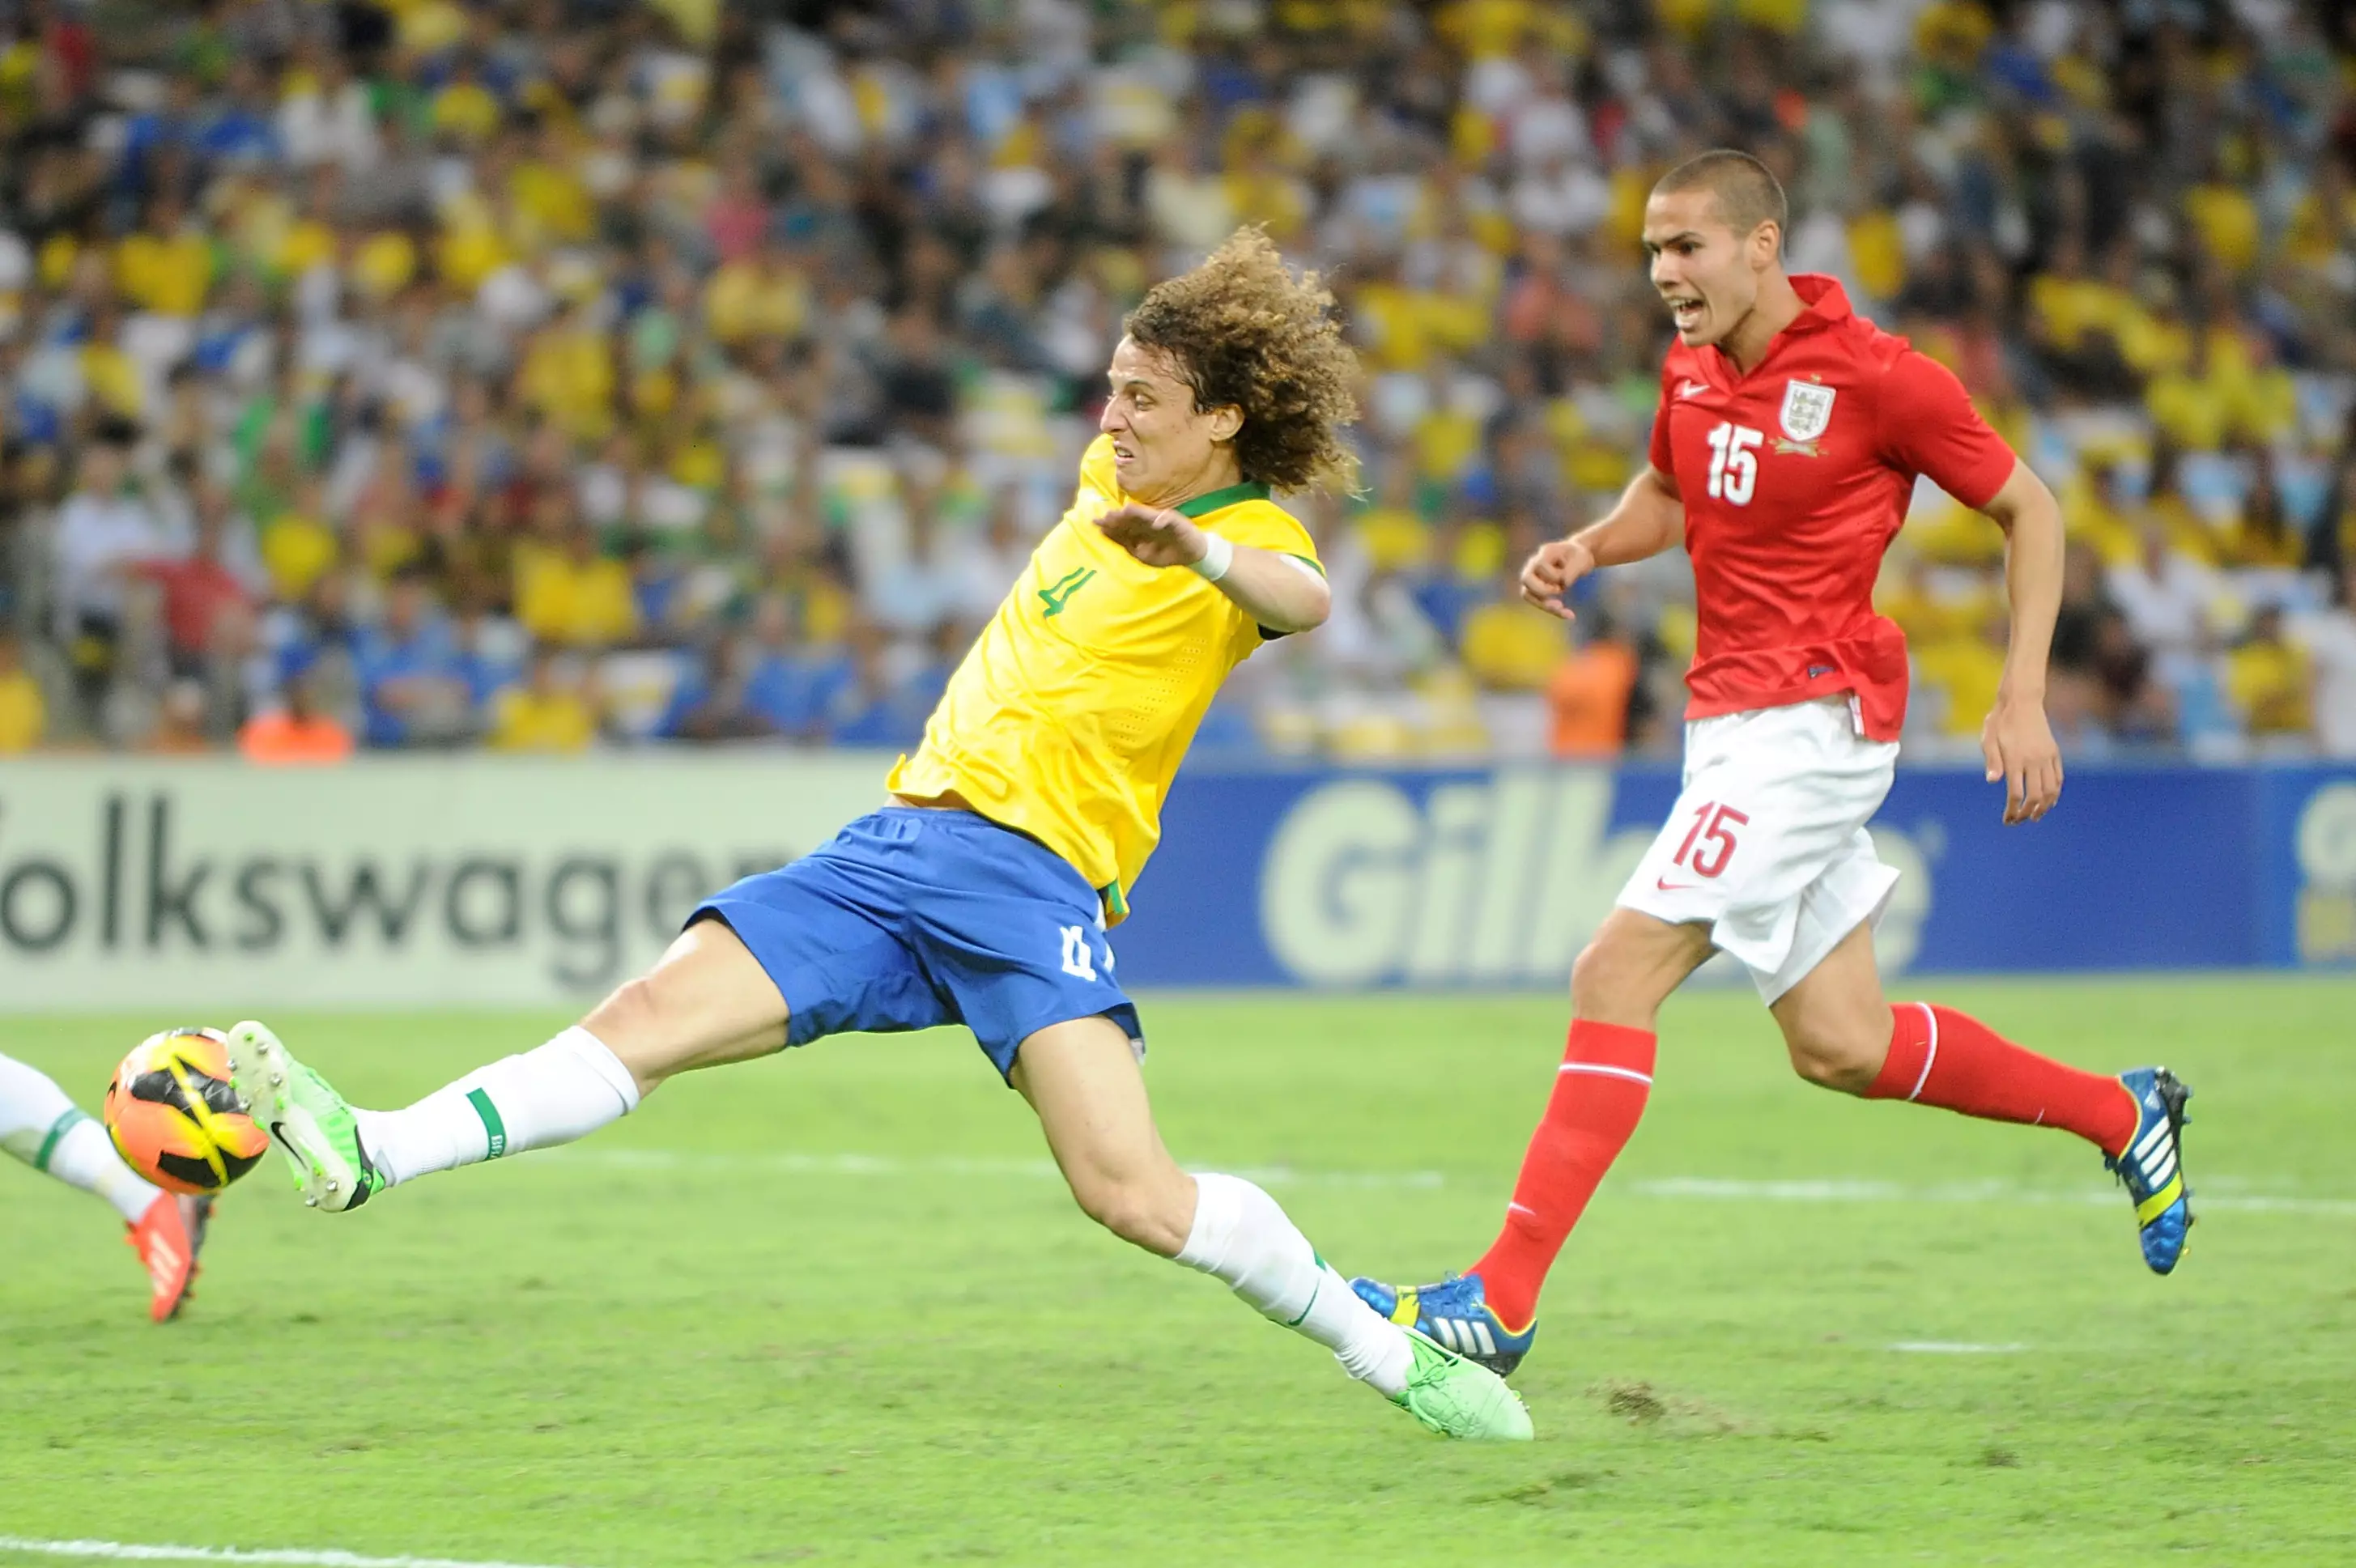 Rodwell's last appearance for England came against Brazil in 2013. Image: PA Images.